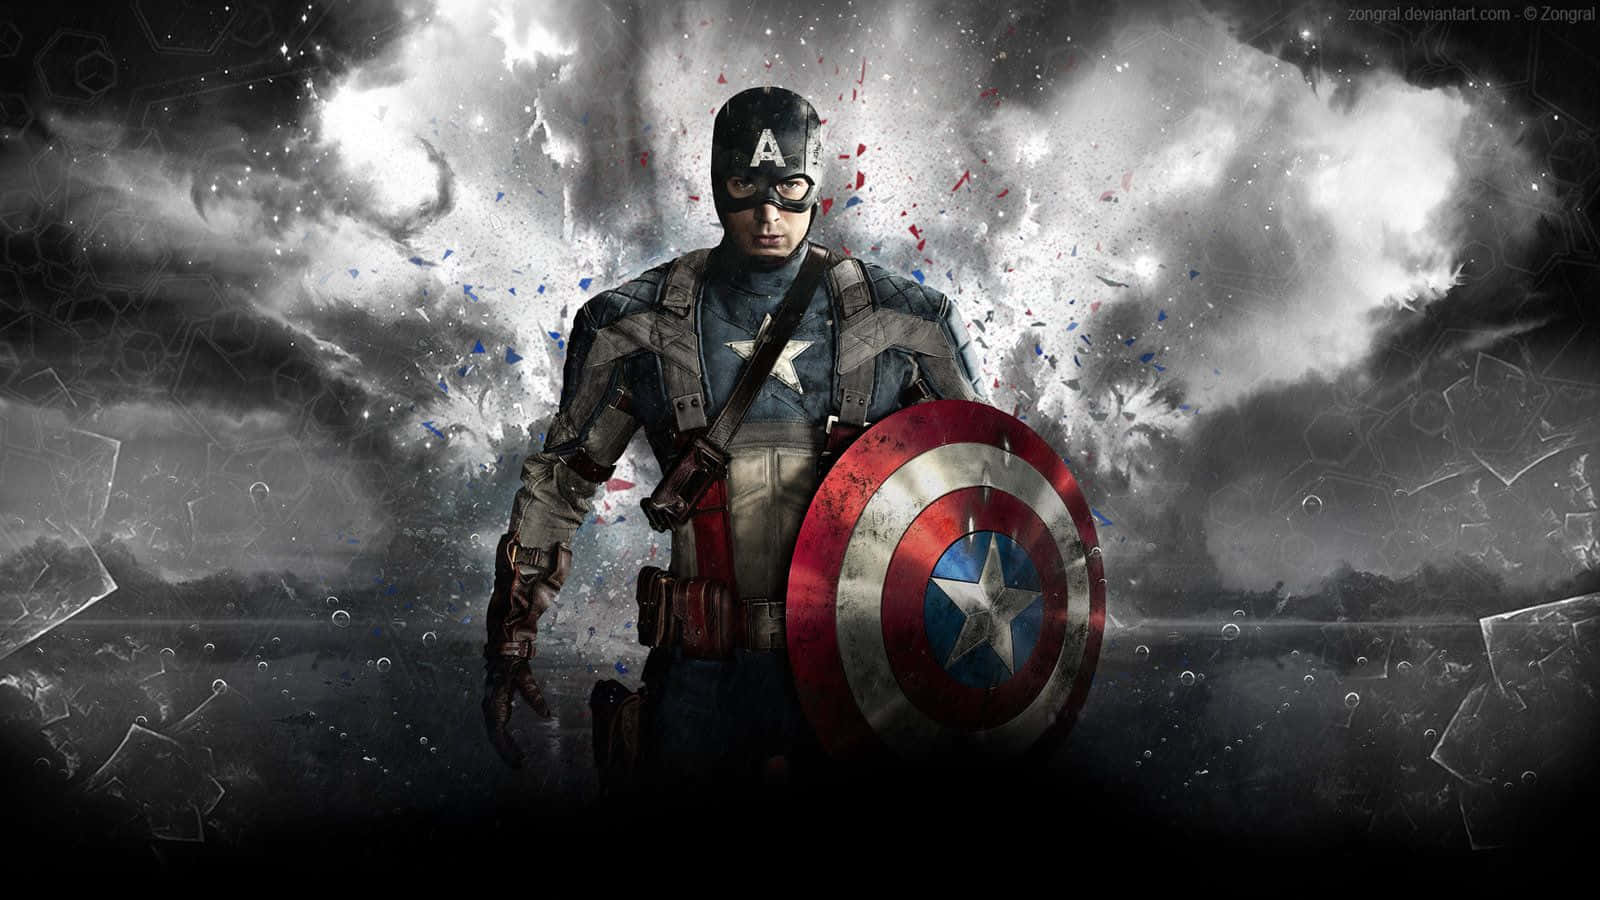 Join the Avengers with the iconic Captain America Logo Wallpaper